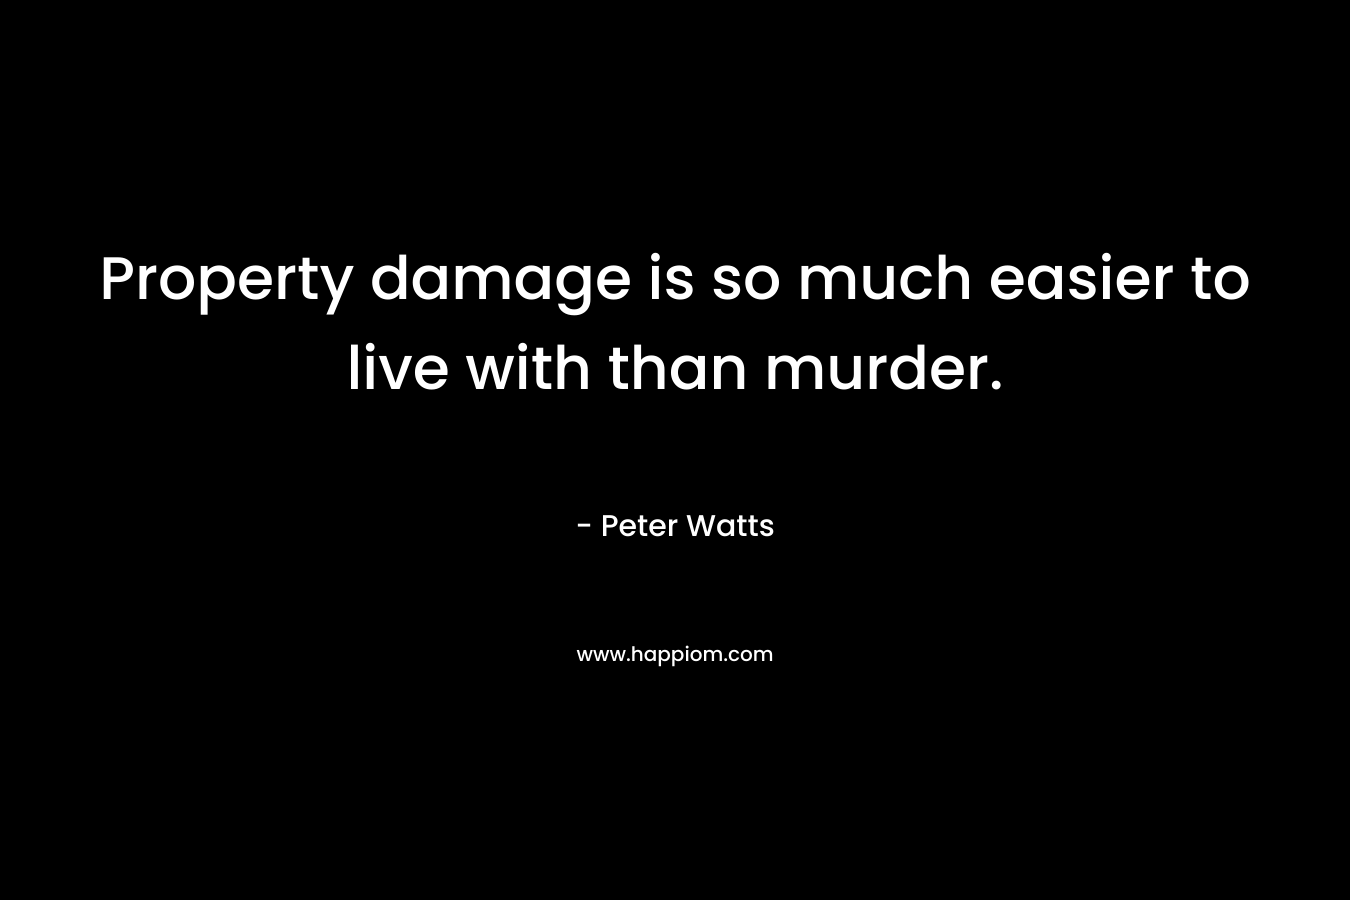 Property damage is so much easier to live with than murder. – Peter Watts